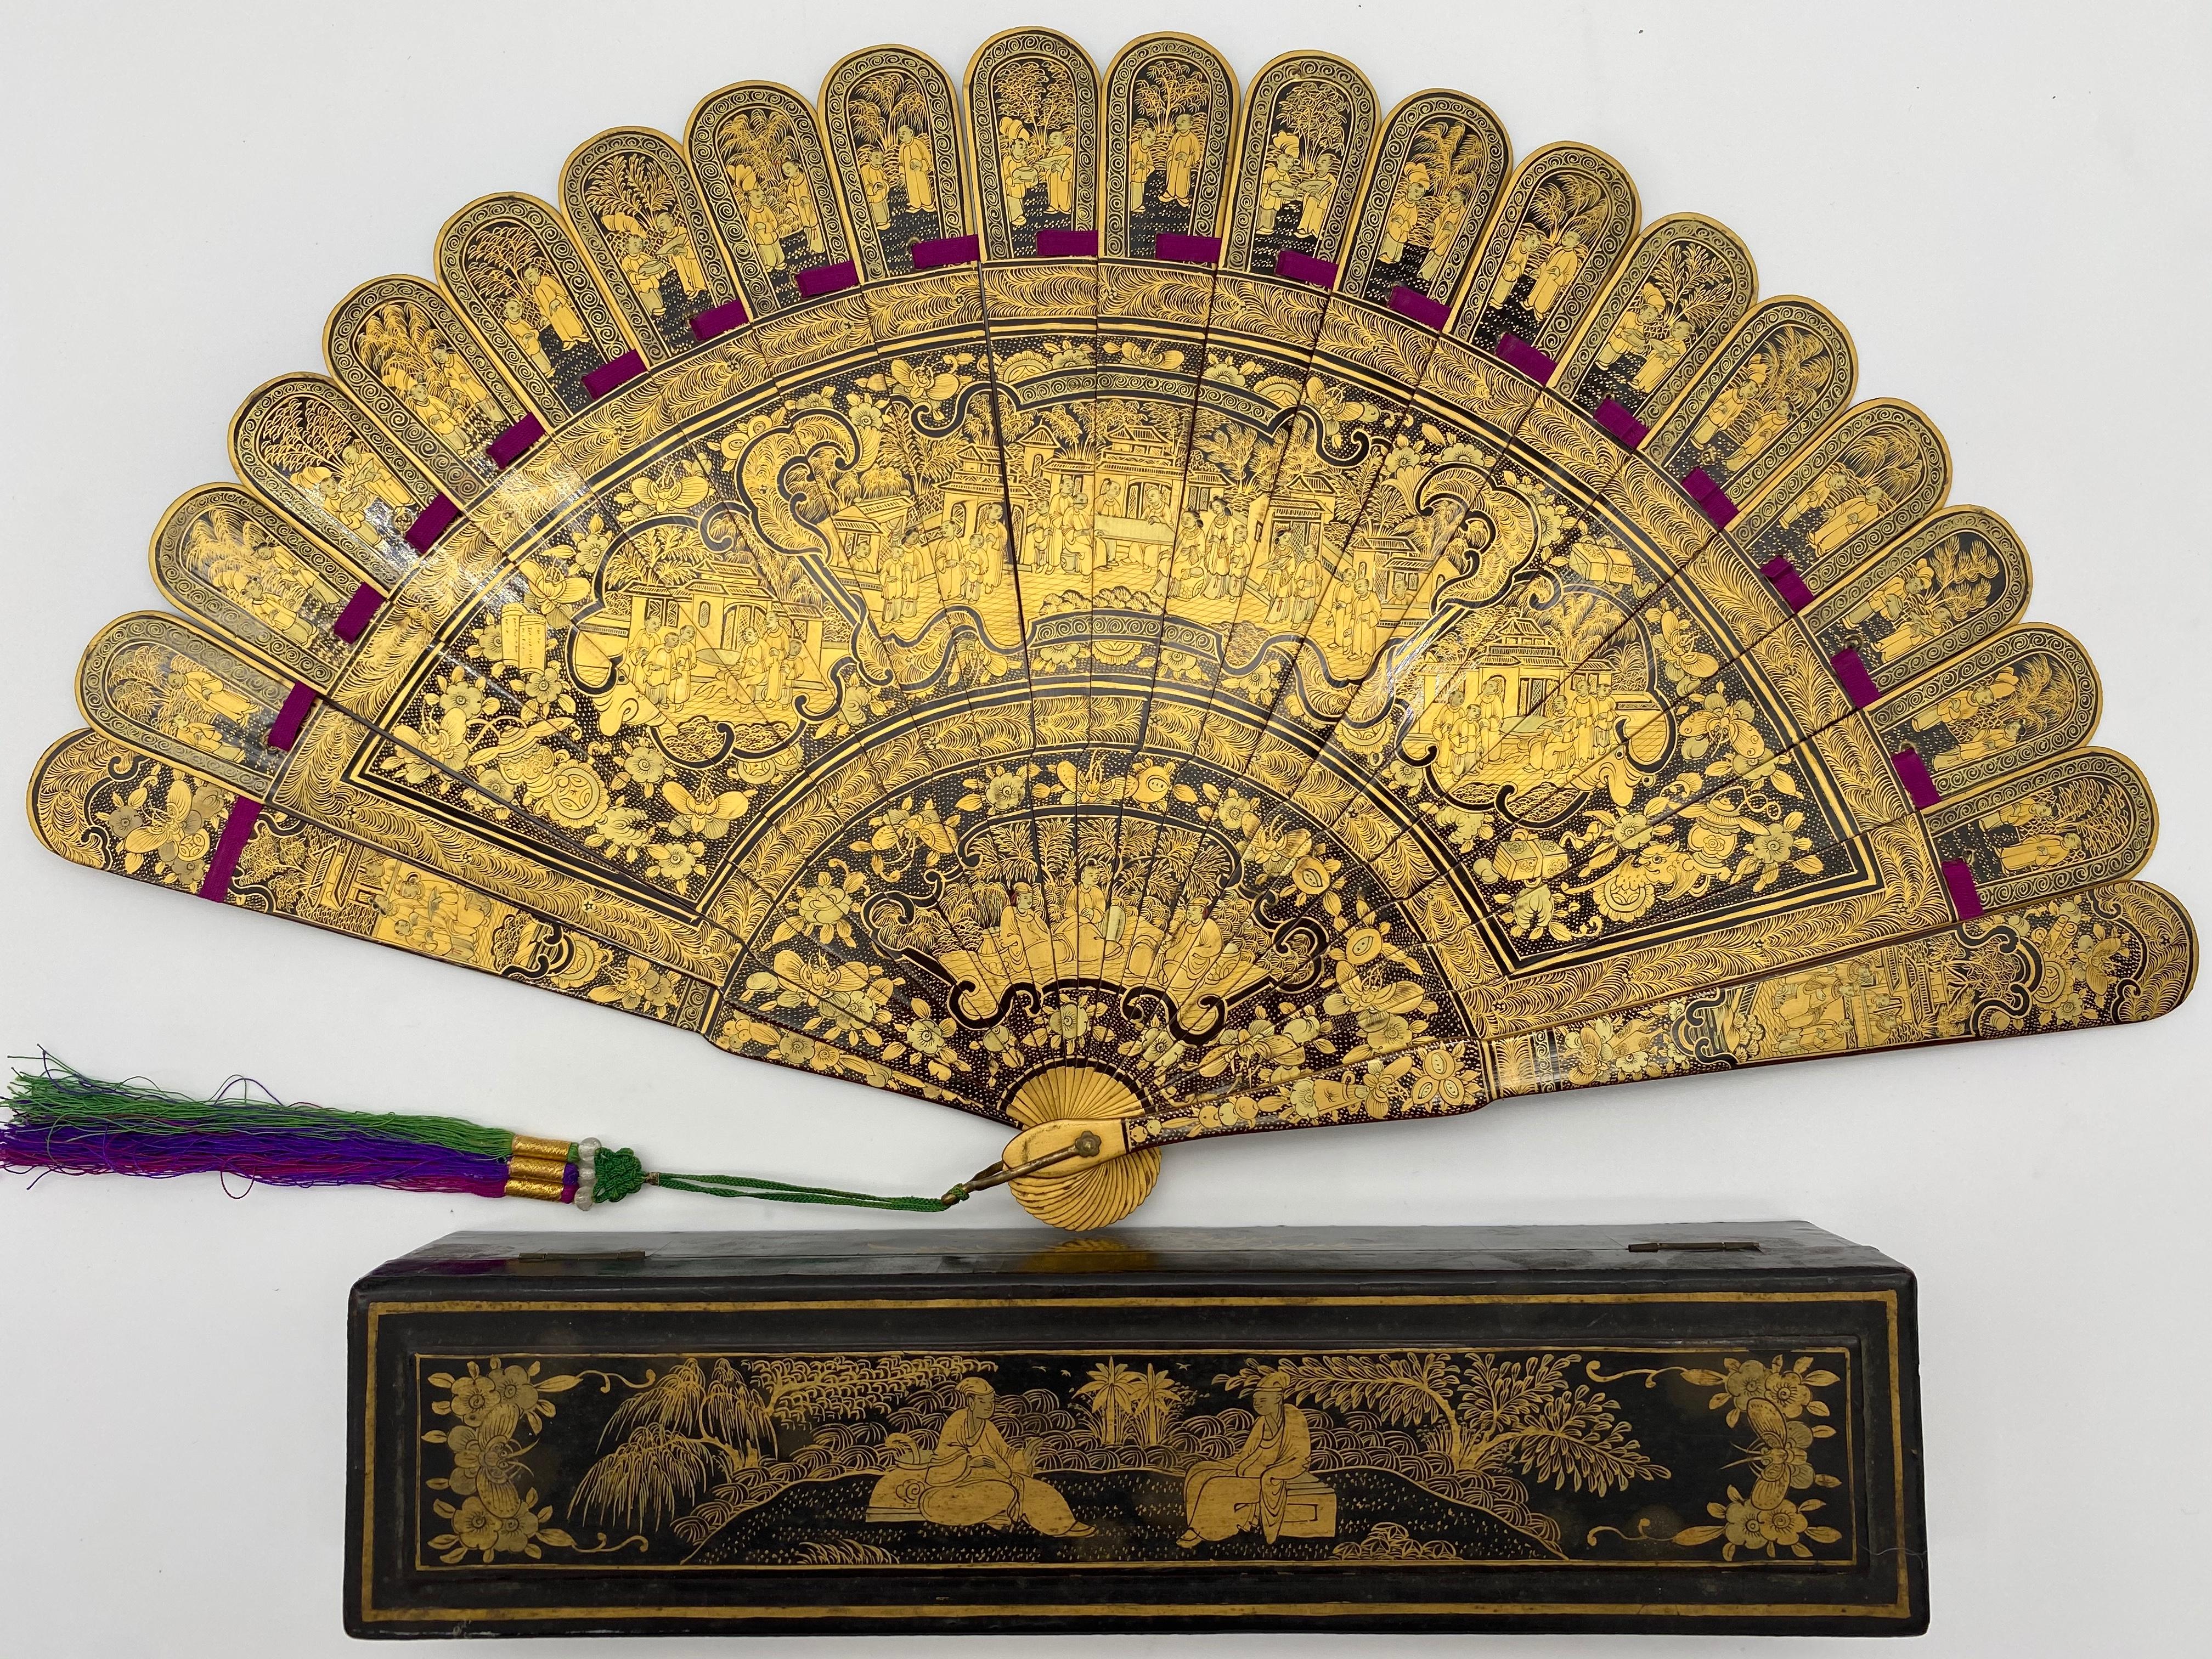 19th century antique Chinese hand painted gold lacquer scene gilt fan 100 faces with original lacquer box, fan is 17 inch x 9.5 x 1, the lacquer fan box is 10.5 x 2.5 x 2 inch.